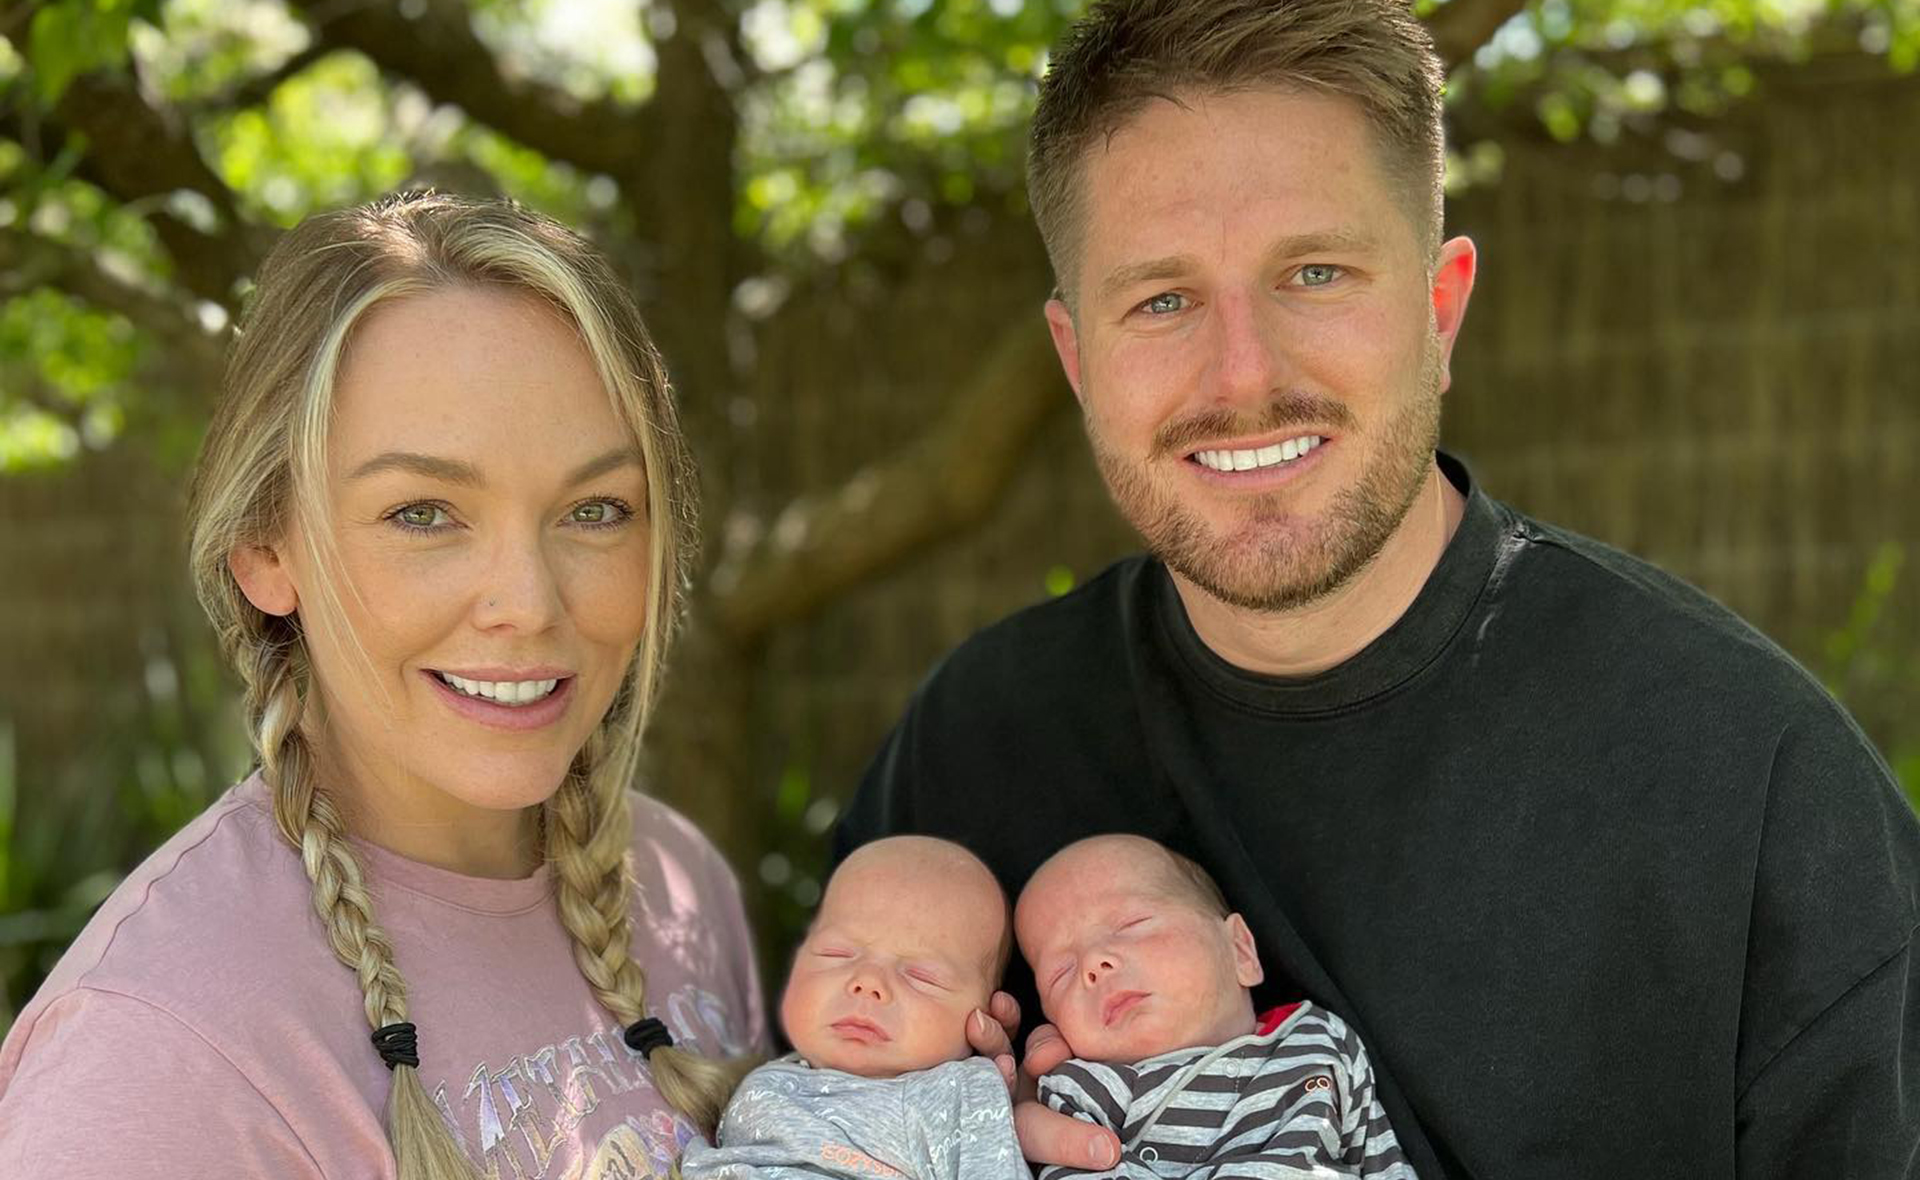 Melissa Rawson and Bryce Ruthven announce their twins’ godfather – and he’s a former MAFS star himself!